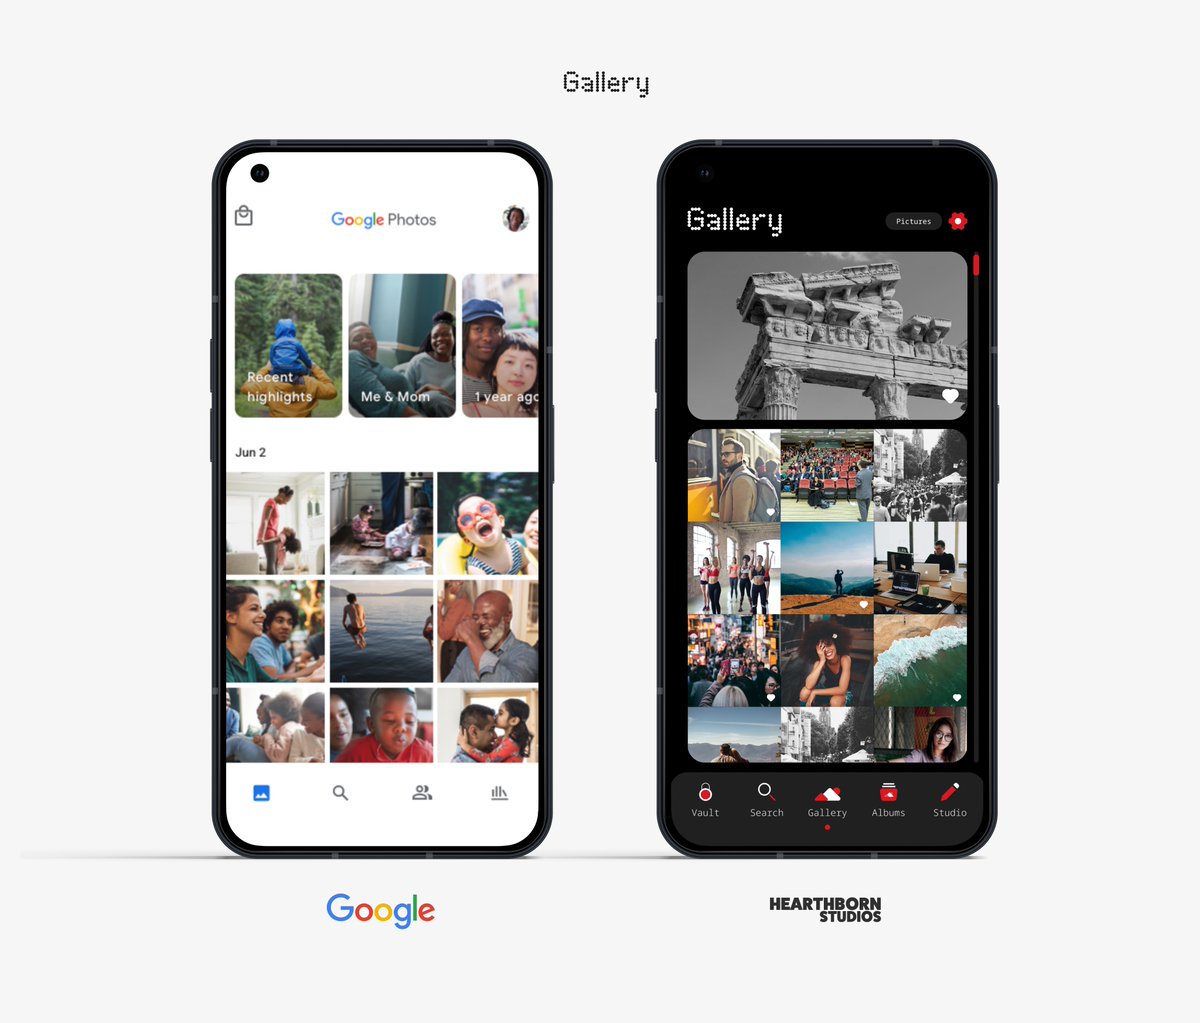 N Gallery: Your memories reimagined! 

This is going to be the most exciting project for our team. Currently in the design phase, its development will start soon enough. Stay tuned.

#nothing #nothingphone #nothingphone2 #gallery #google #photos #app #appdev #memories @nothing